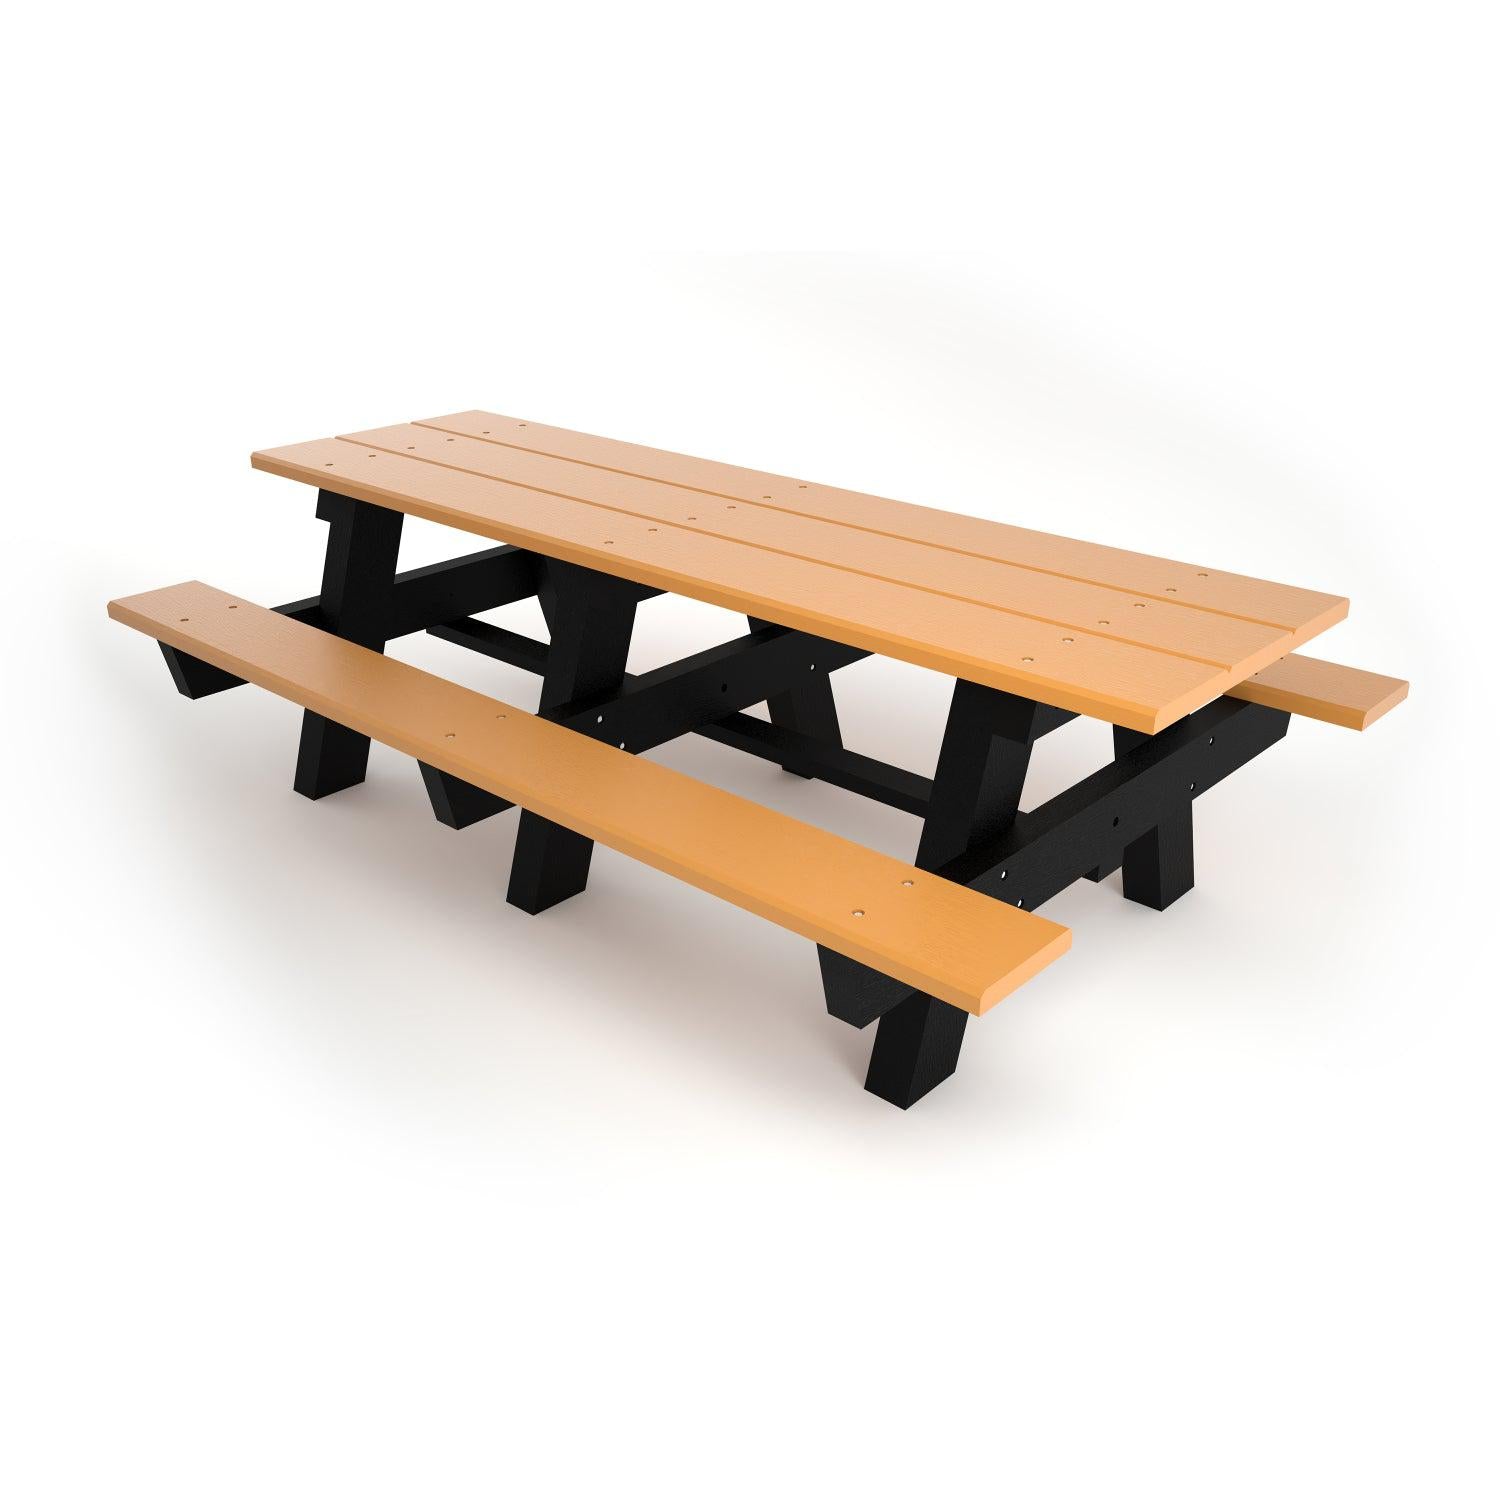 Economy A-Frame Wooden Picnic Table - 8